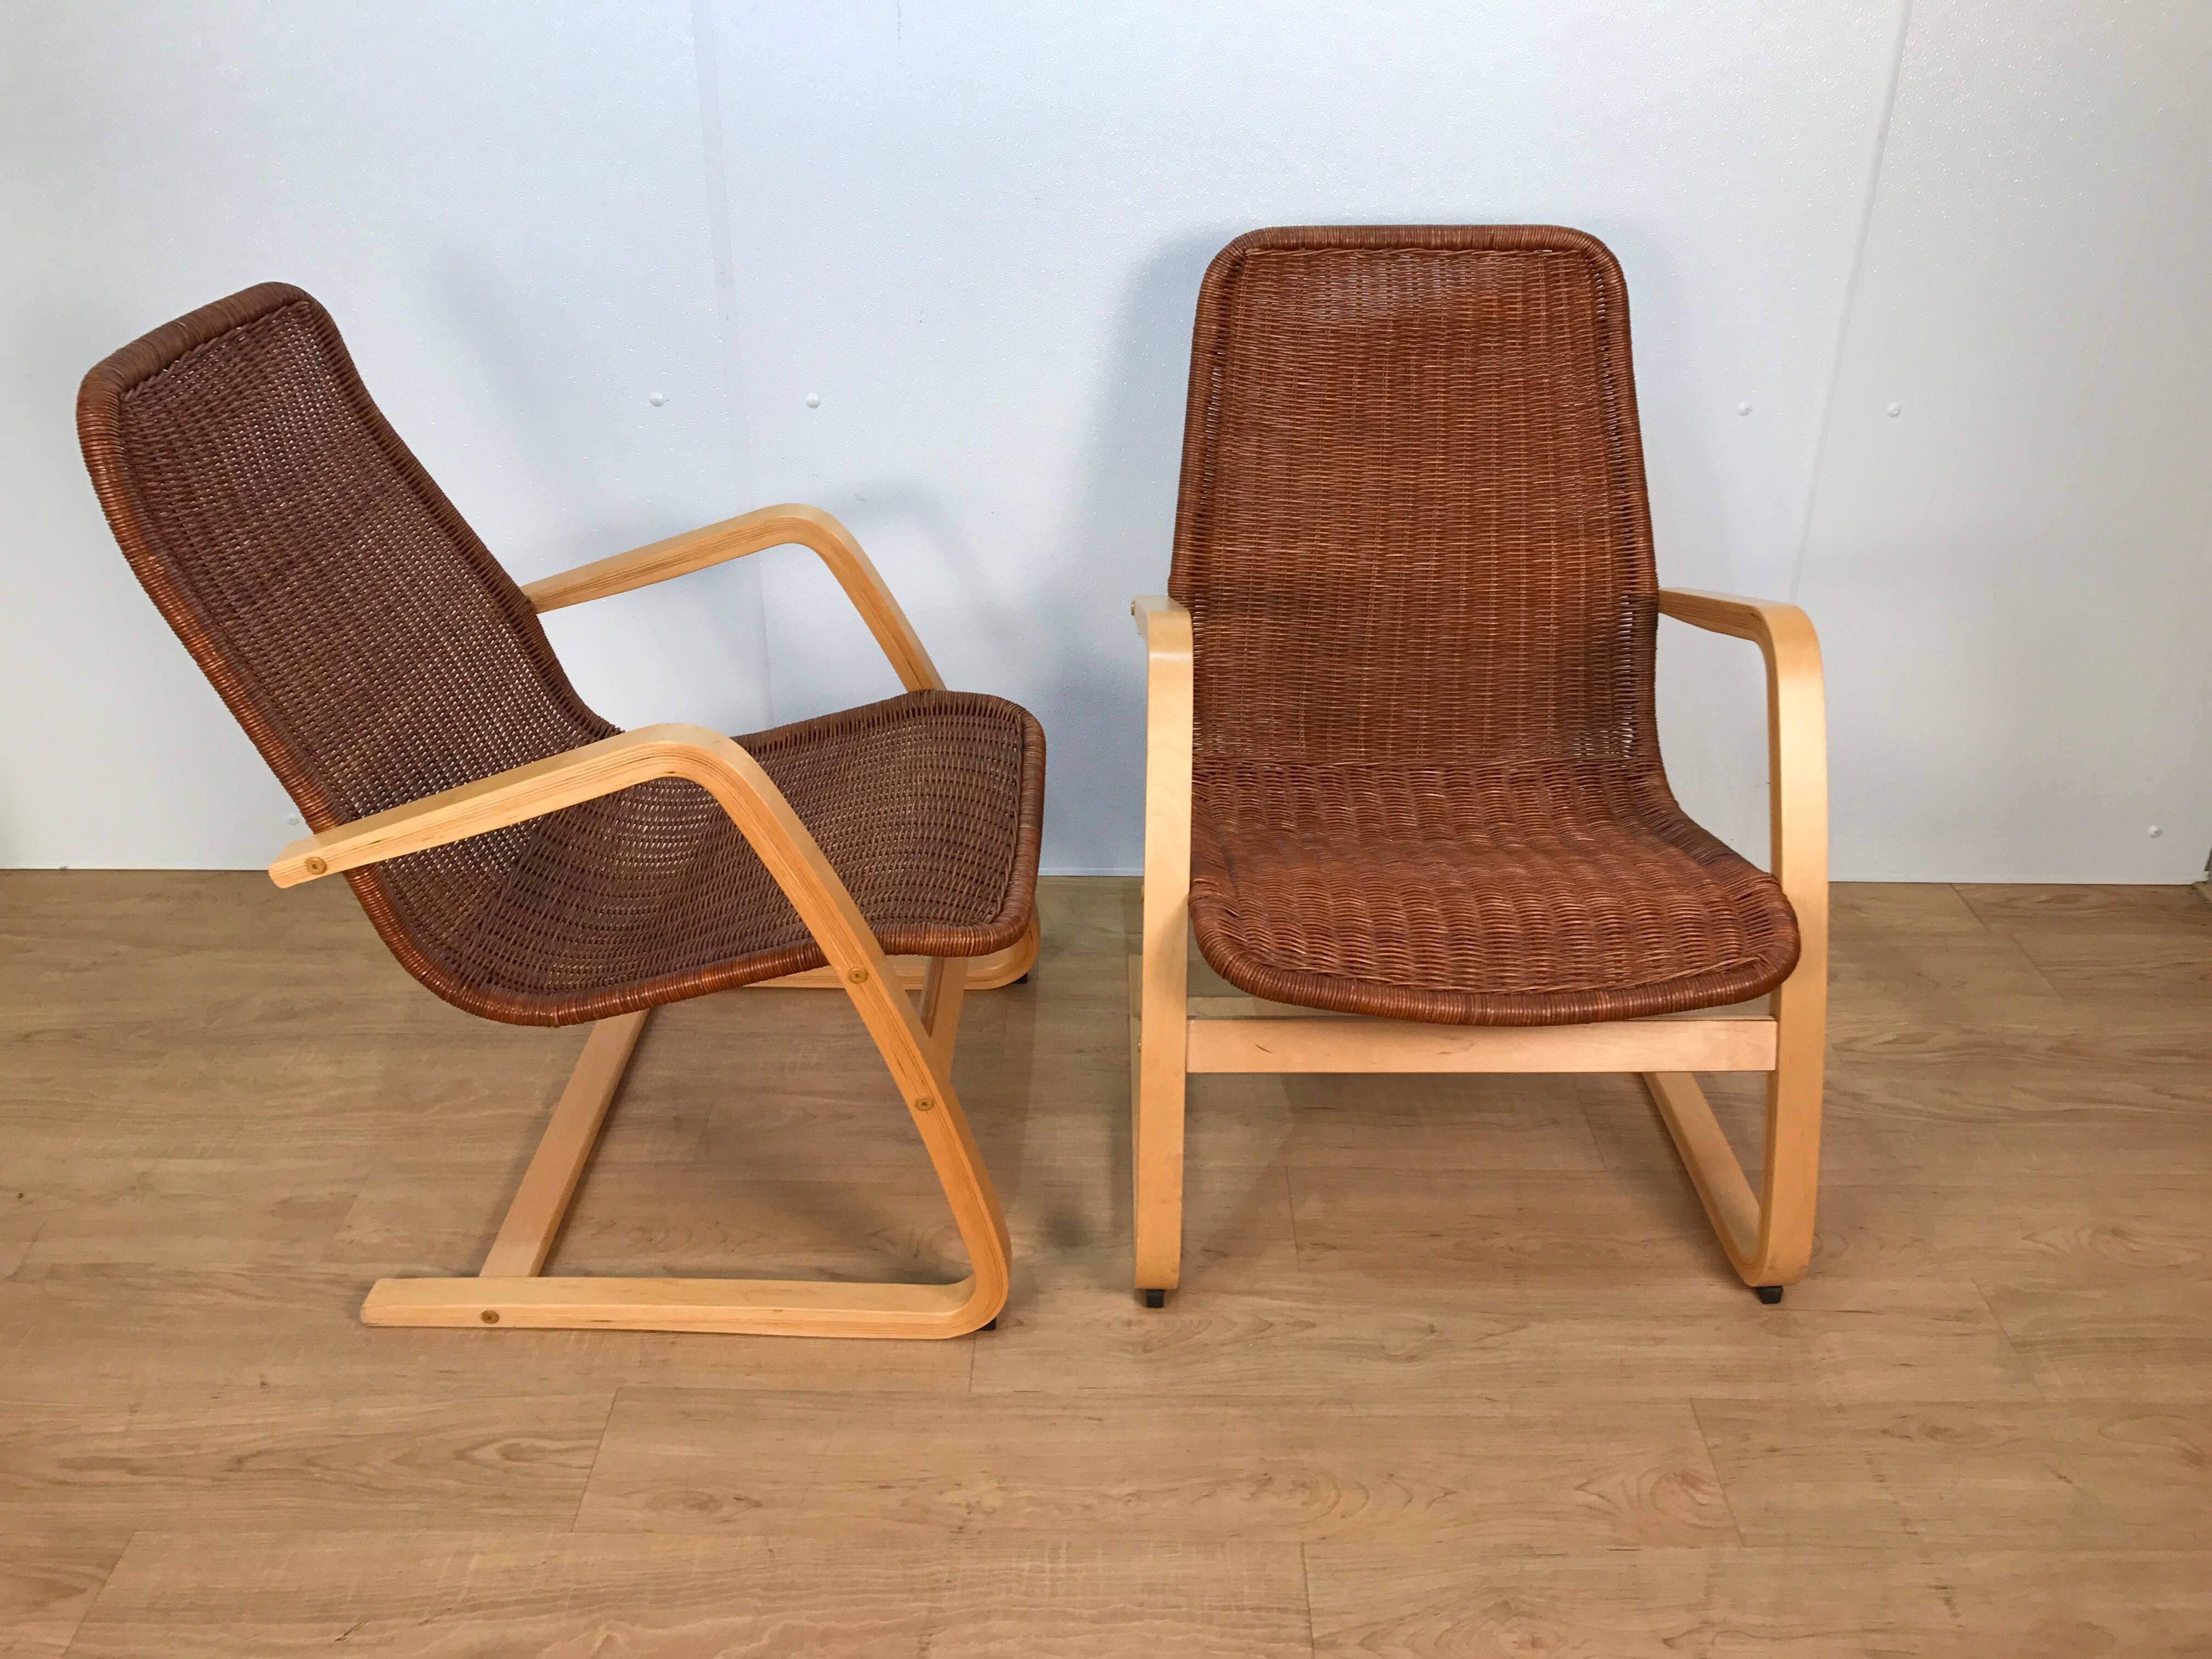 Pair of Alvar Aalto style wicker lounge chairs, each one with rich dark brown wicker seat and back rests on a blonde wood cantilever frame. Very comfortable pair of chairs with a little "bounce". The seat is 18" wide. A great pair of